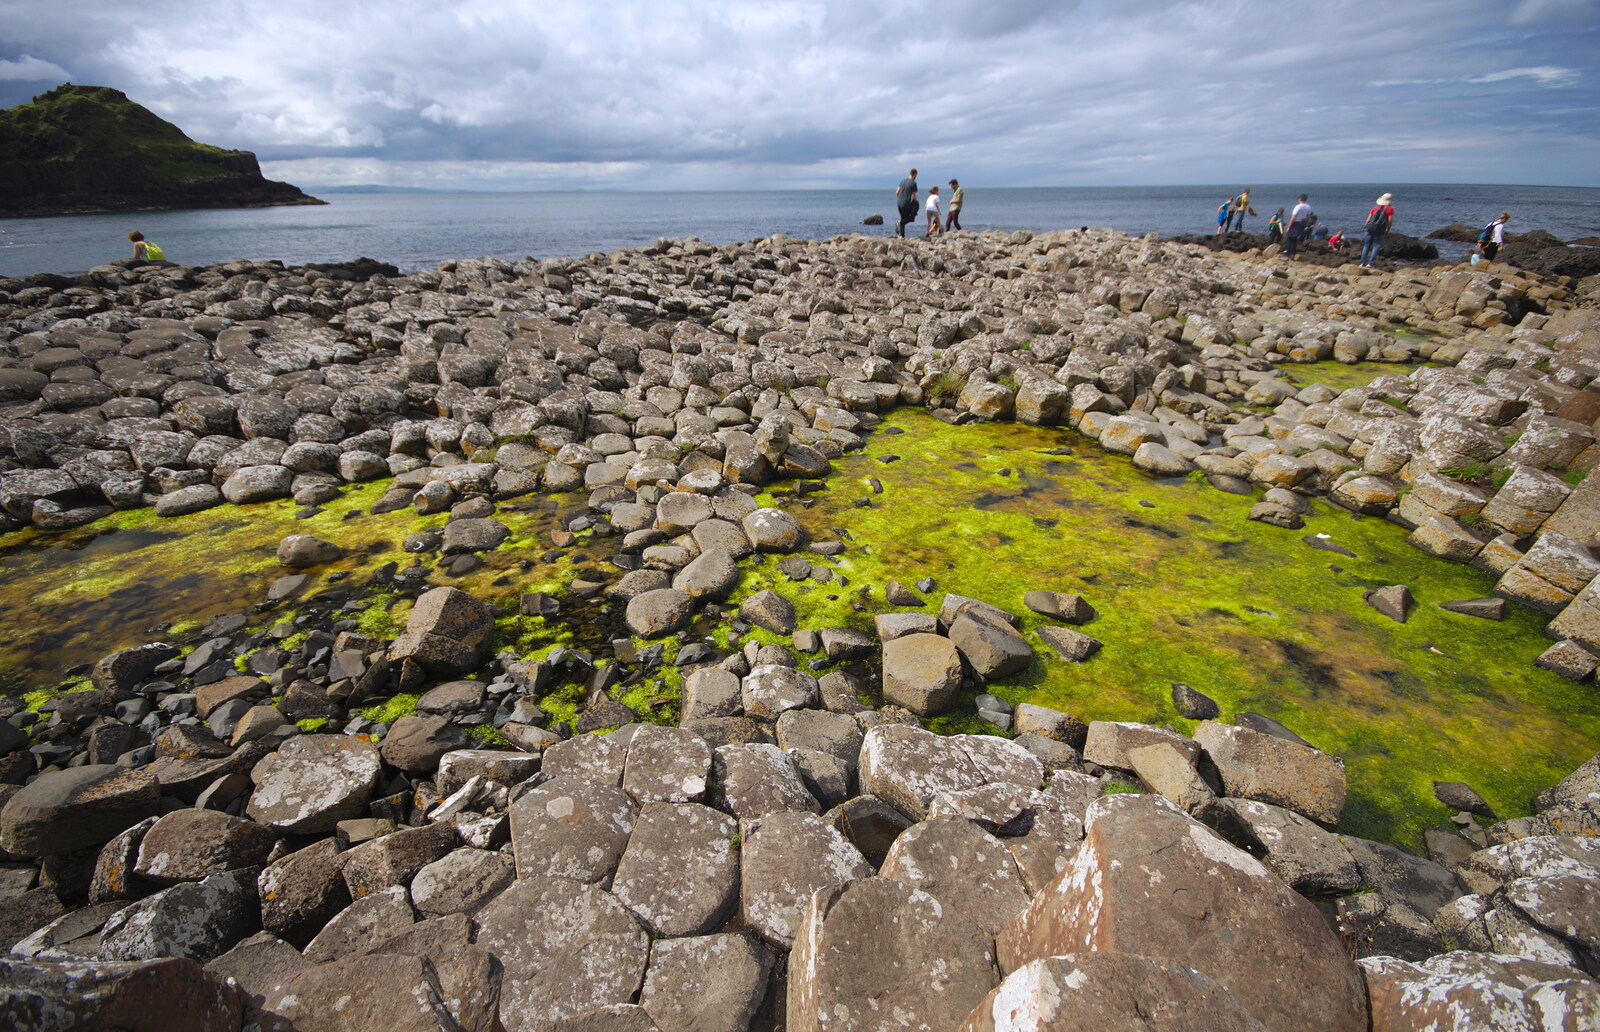 Bright green algae amongs the lava columns from The Giant's Causeway, Bushmills, County Antrim, Northern Ireland - 14th August 2019